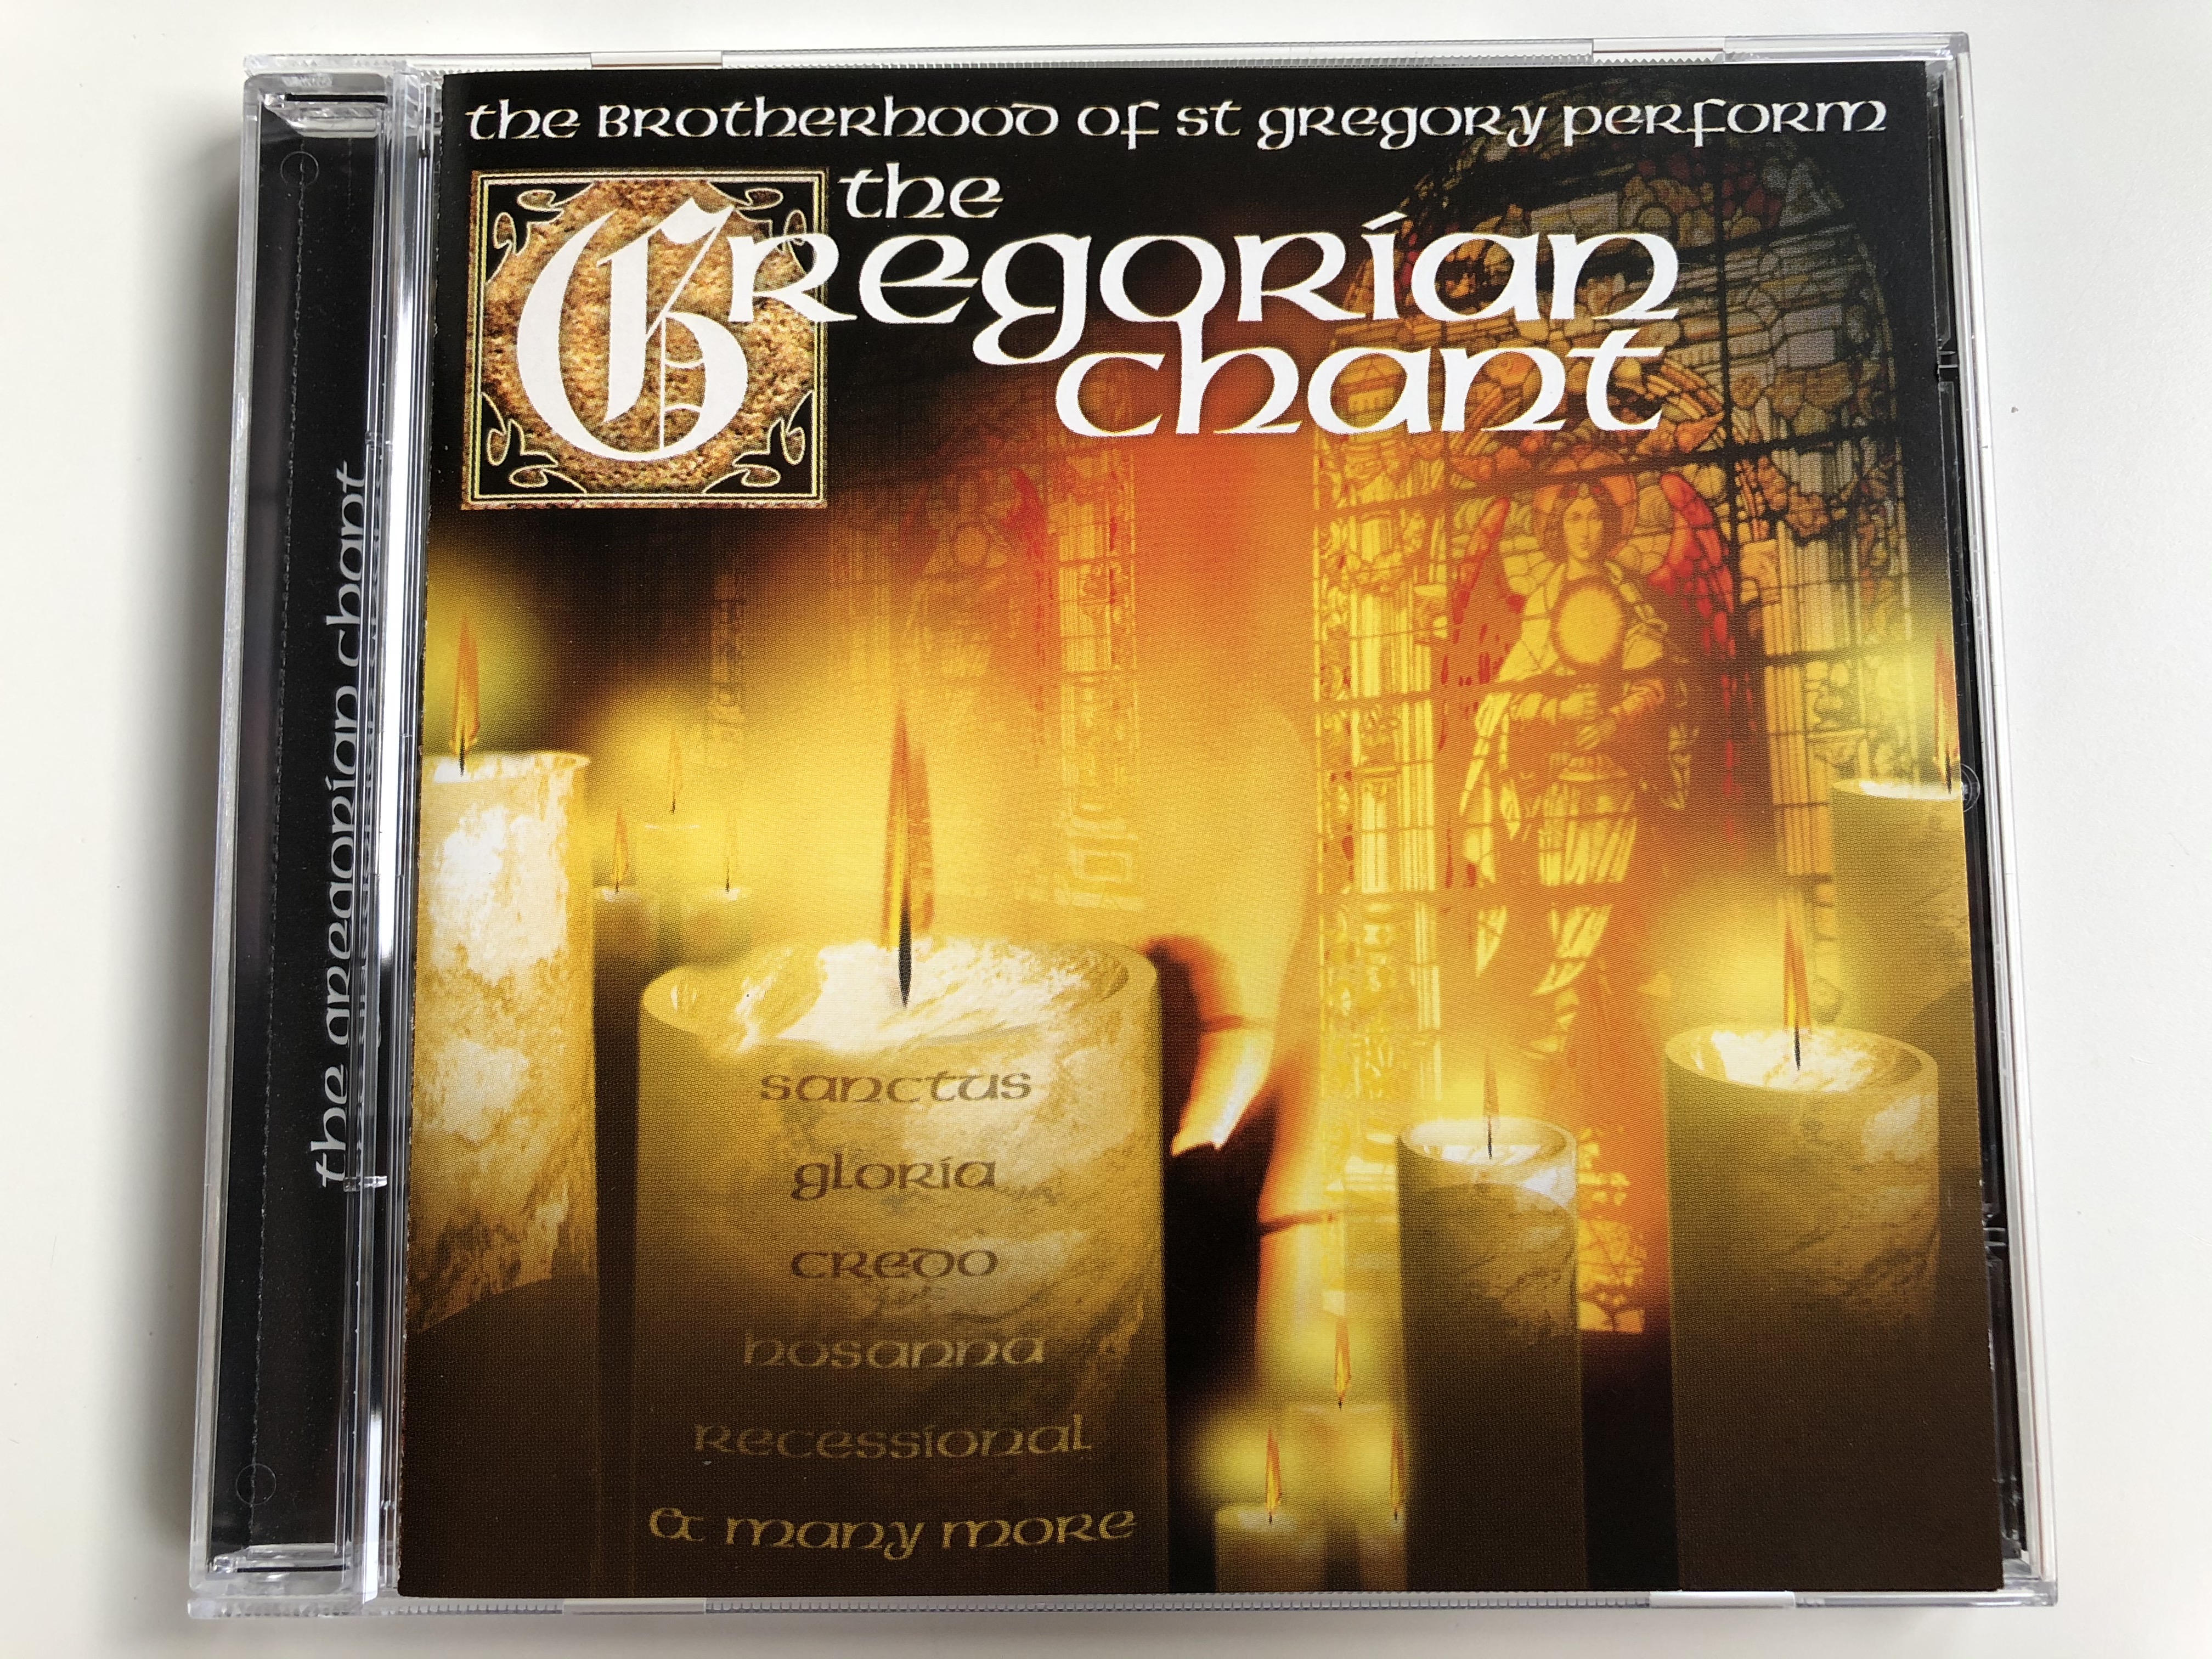 the-brotherhood-of-st.-gregory-perform-the-gregorian-chant-sanctus-gloria-credo-hosanna-recessional-and-many-more-going-for-a-song-audio-cd-gfs429-1-.jpg